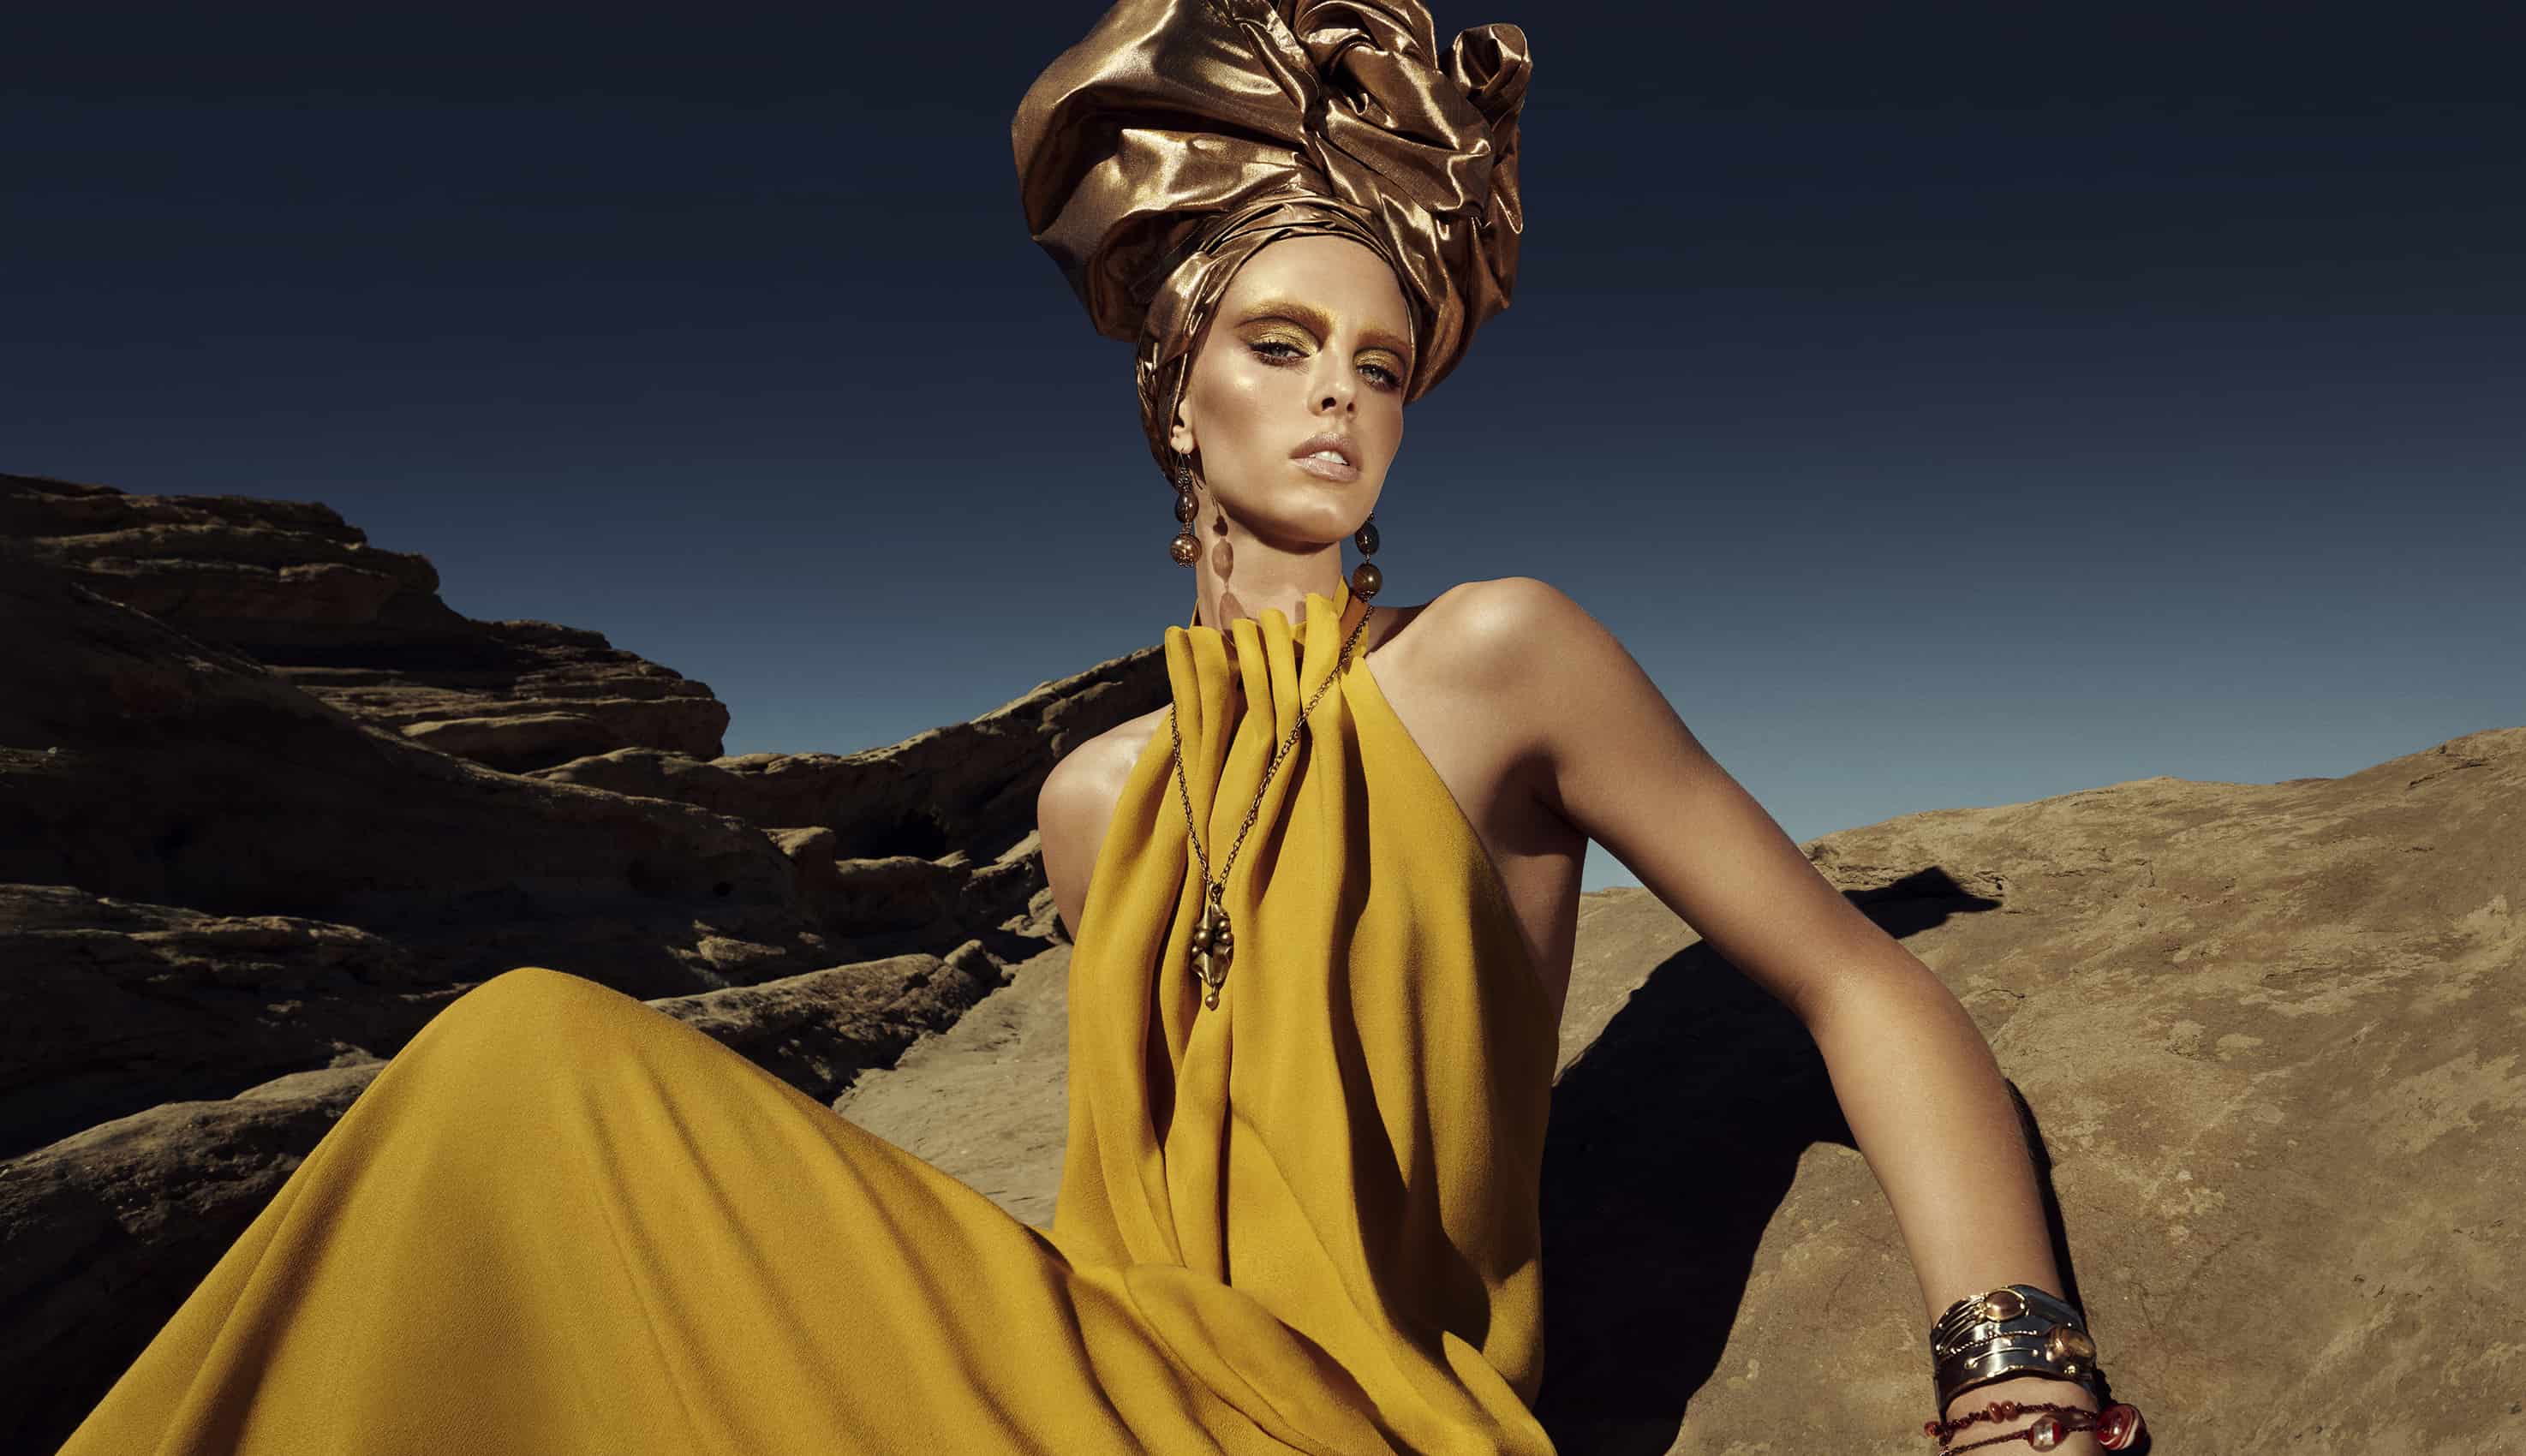 The Zara Ss 21 Campaign Is Giving Us Major Wanderlust